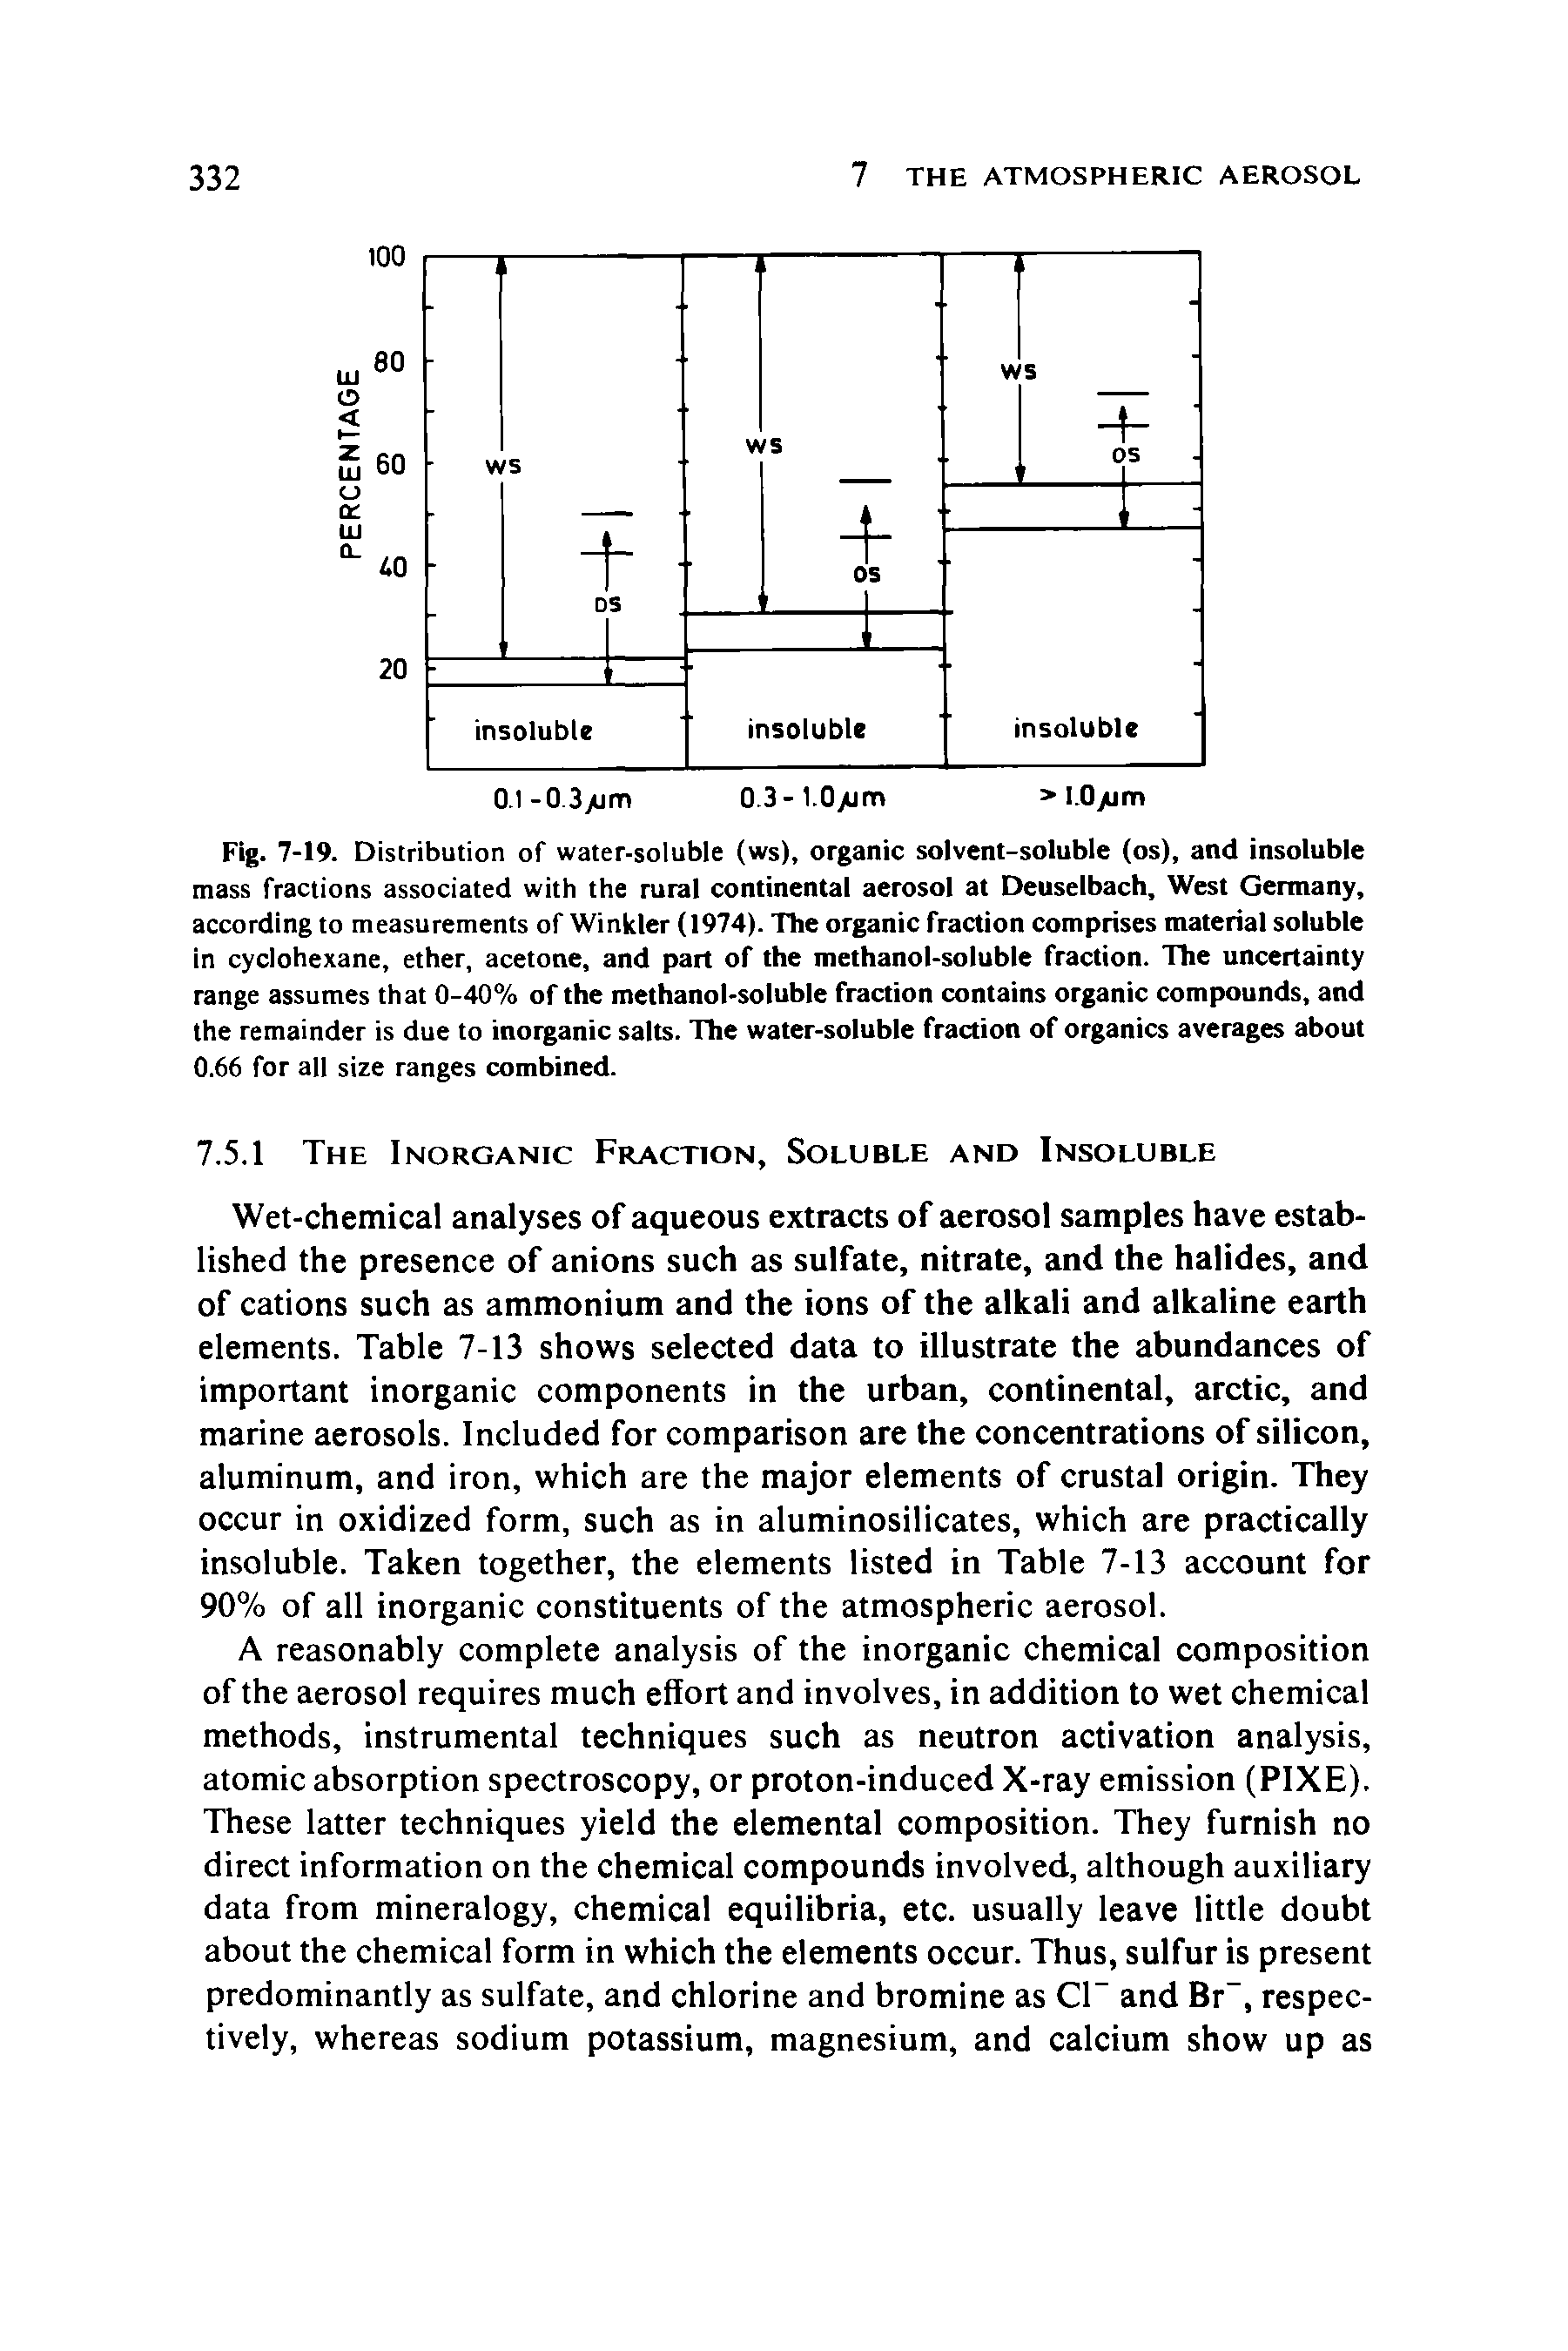 Fig. 7-19. Distribution of water-soluble (ws), organic solvent-soluble (os), and insoluble mass fractions associated with the rural continental aerosol at Deuselbach, West Germany, according to measurements of Winkler (1974). The organic fraction comprises material soluble in cyclohexane, ether, acetone, and part of the methanol-soluble fraction. The uncertainty range assumes that 0-40% of the methanol-soluble fraction contains organic compounds, and the remainder is due to inorganic salts. The water-soluble fraction of organics averages about 0.66 for all size ranges combined.